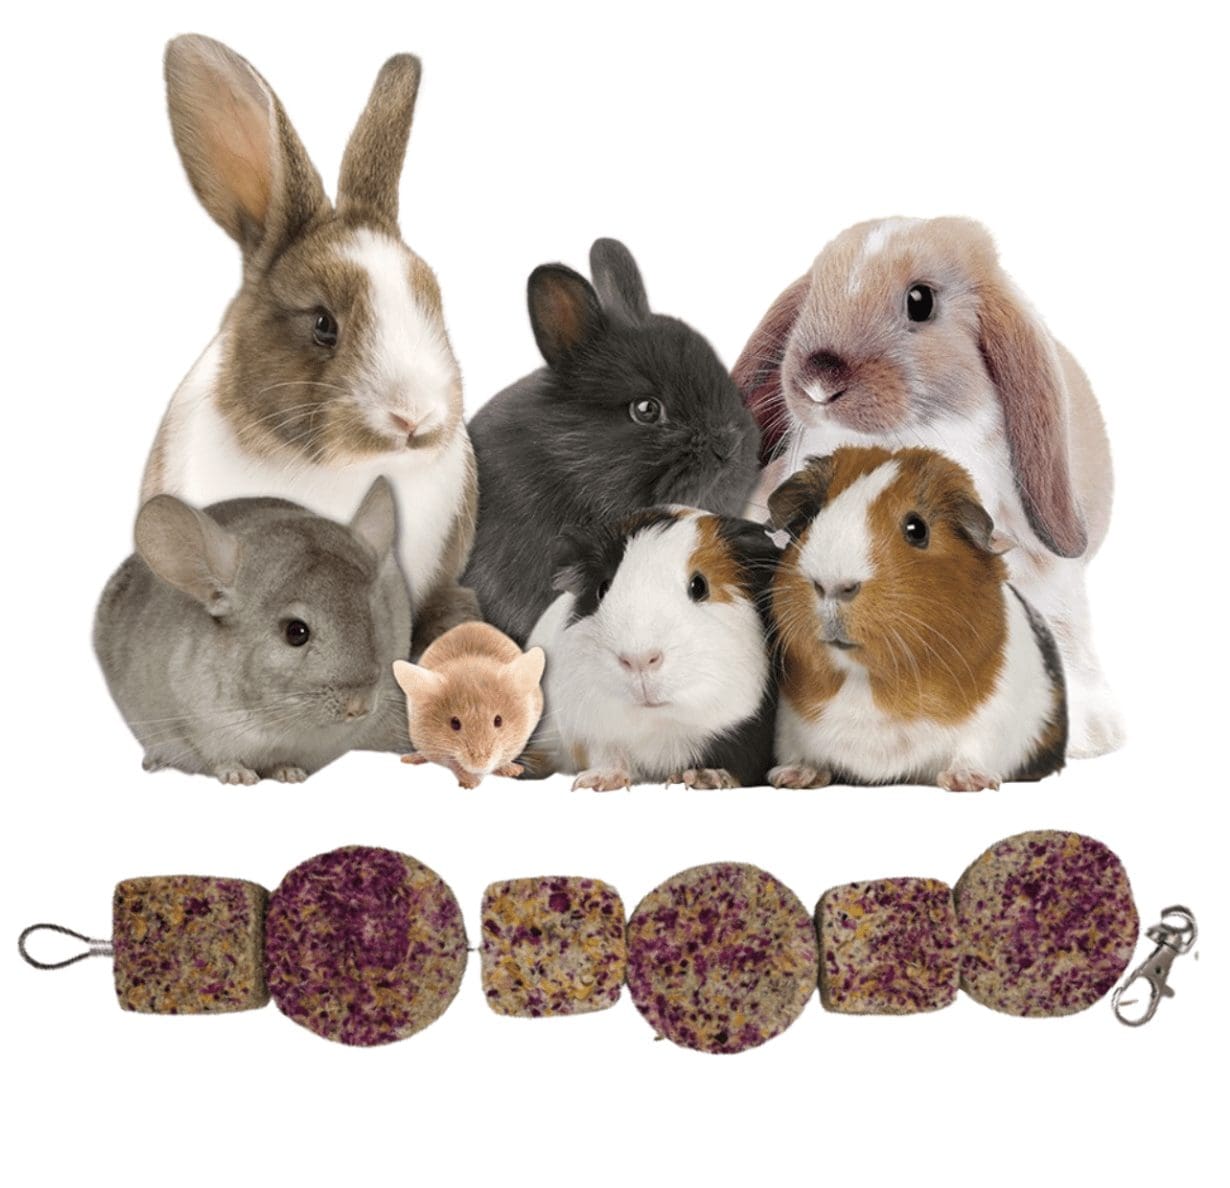 Timothy Hay Floral Grass Cube and Round Cakes Hanging Chew Treat For Rabbit, Hamsters, Guinea Pigs, Chinchillas & Small Rodents.